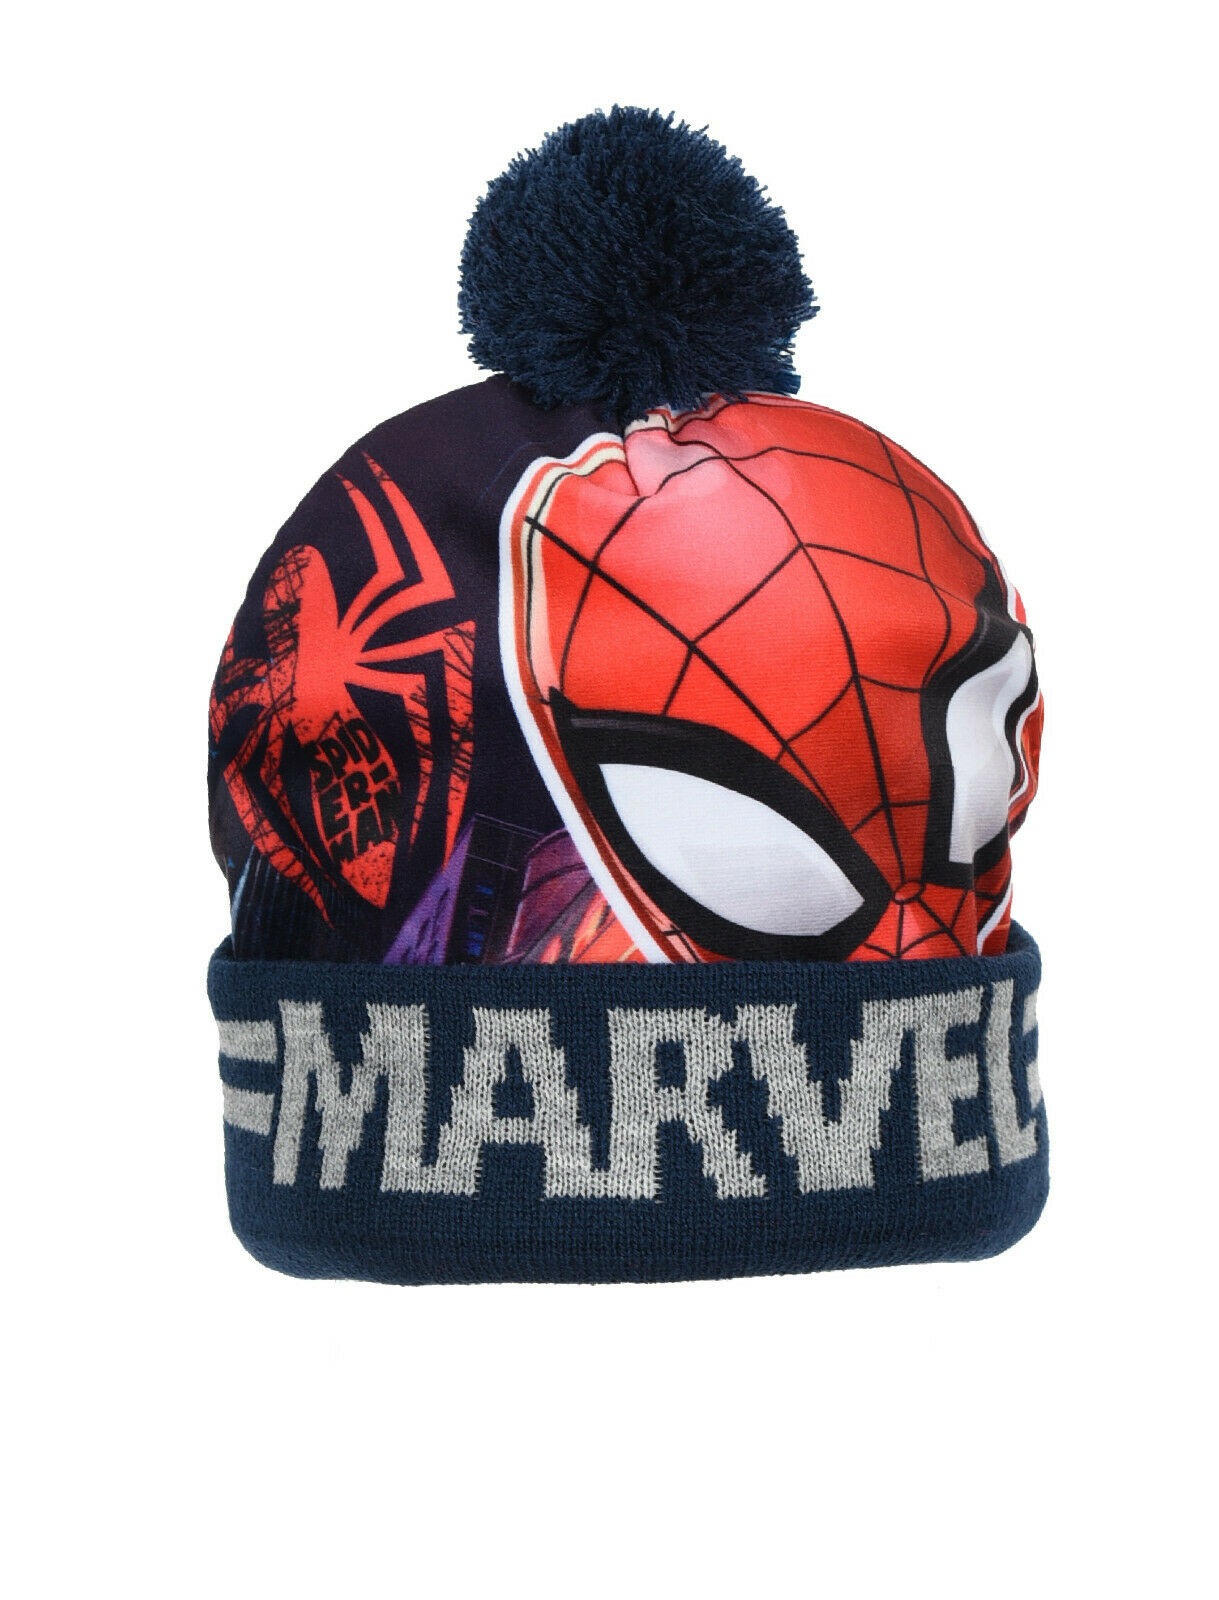 Spiderman Beanie Hat In Navy blue, Perfect For The Winter.